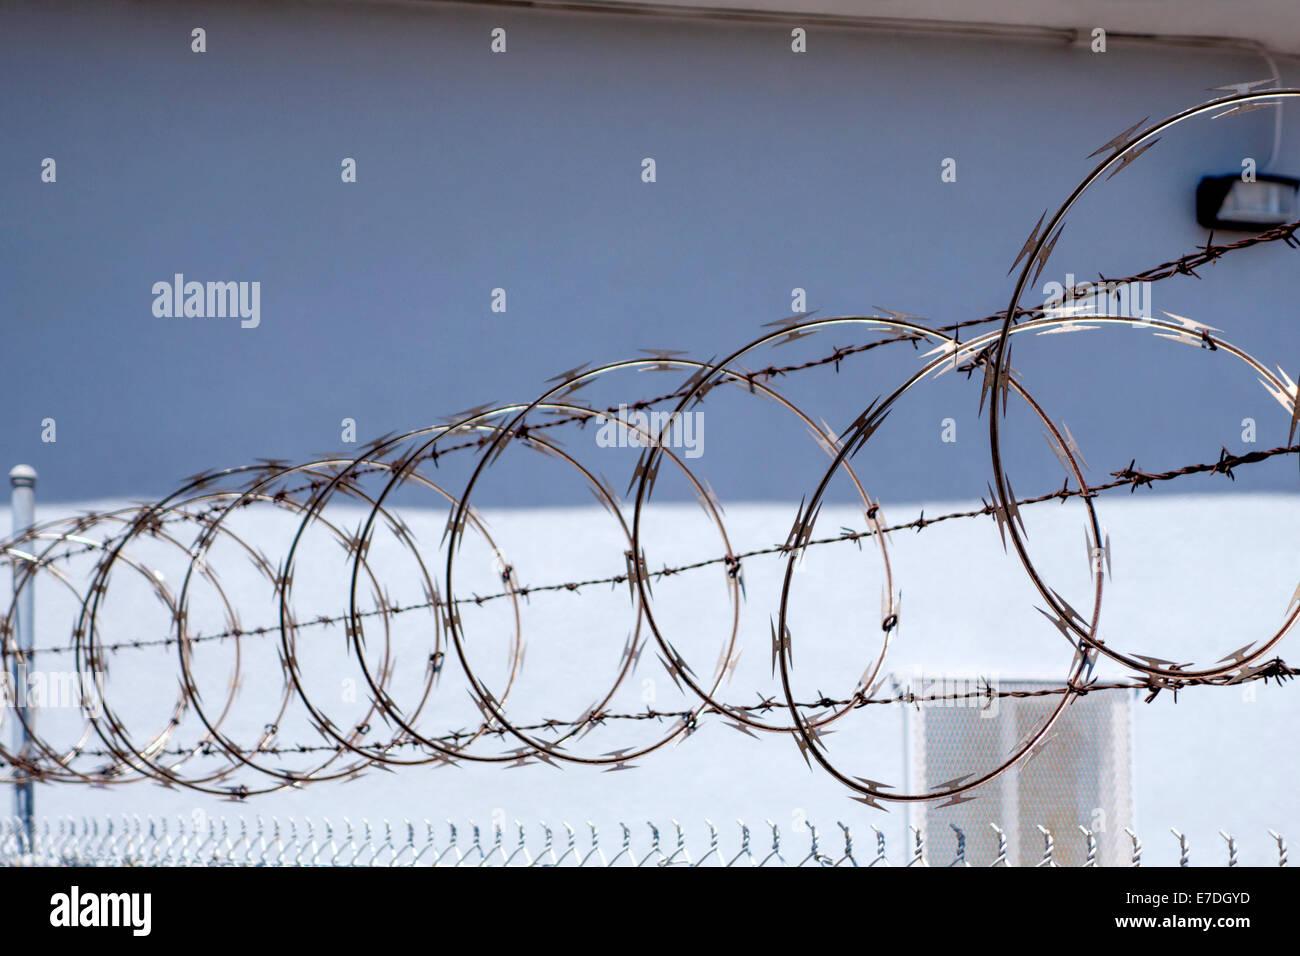 Barbed wire over a fence, San Diego, California Stock Photo